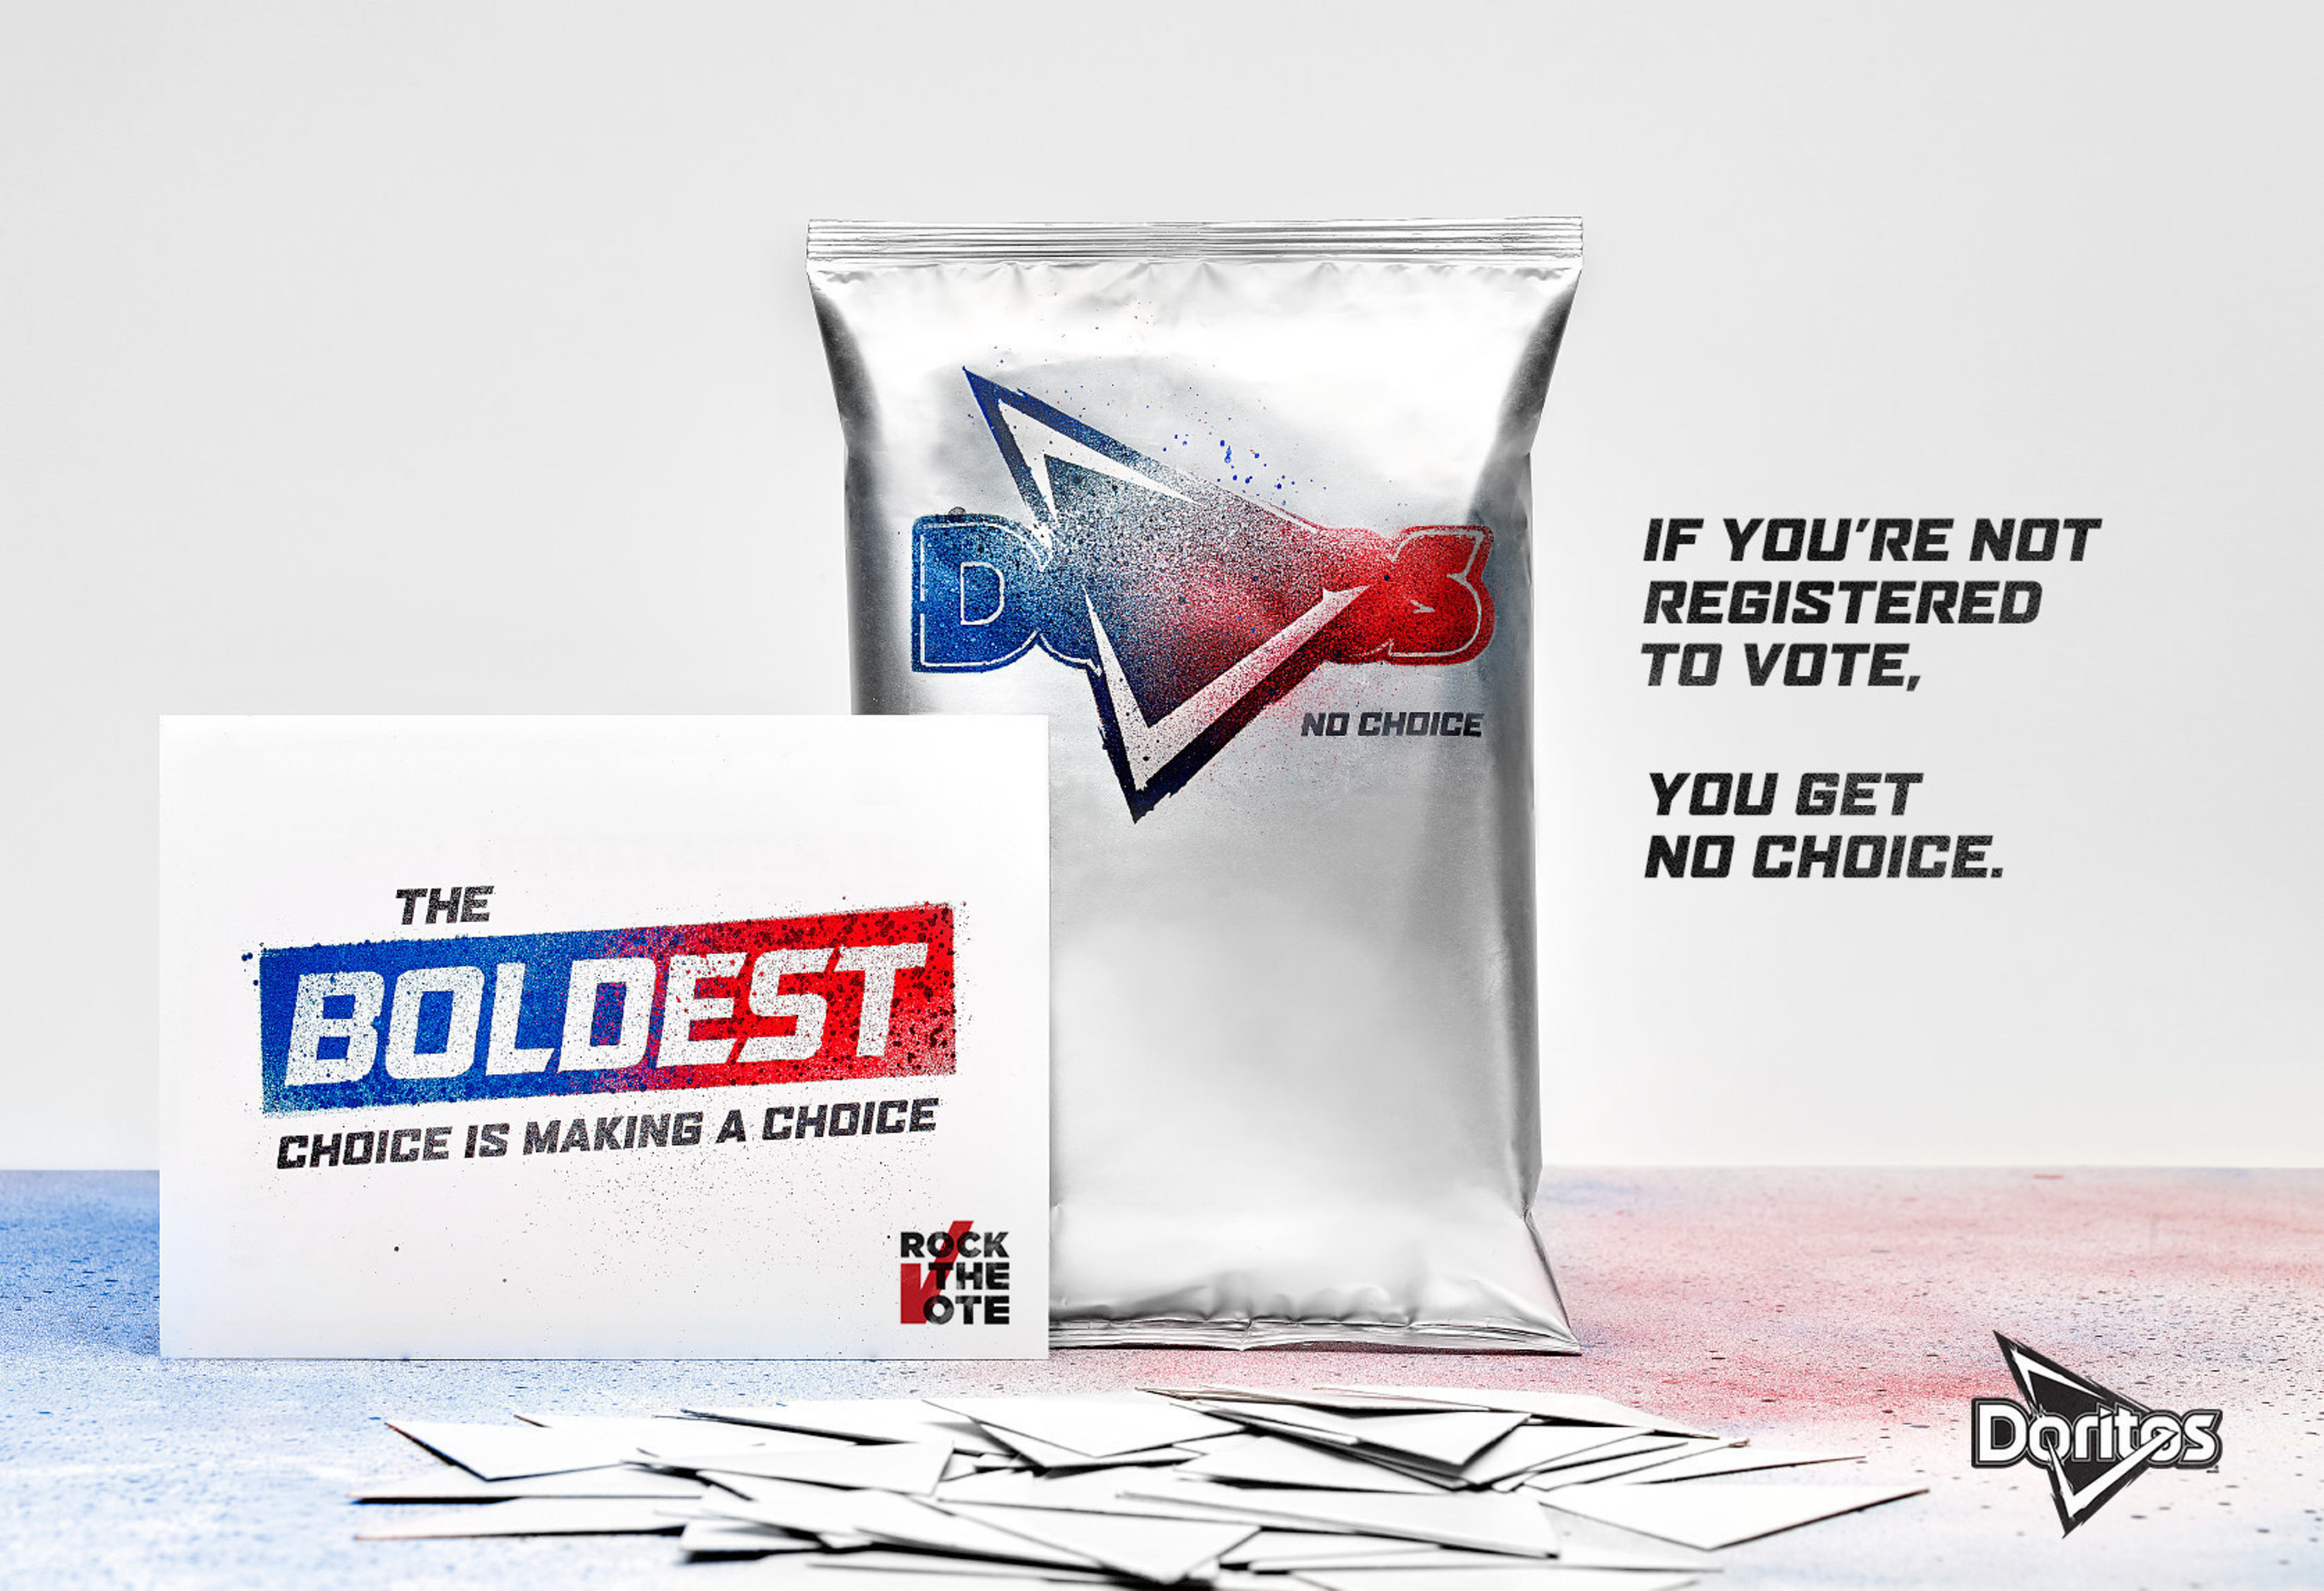 Doritos' Partnership with Rock the Vote and Limited-Edition Bags Rally Millennial Voters - a Rapidly Growing Voting Contingent - to Take a Stand, Make a Choice and Vote